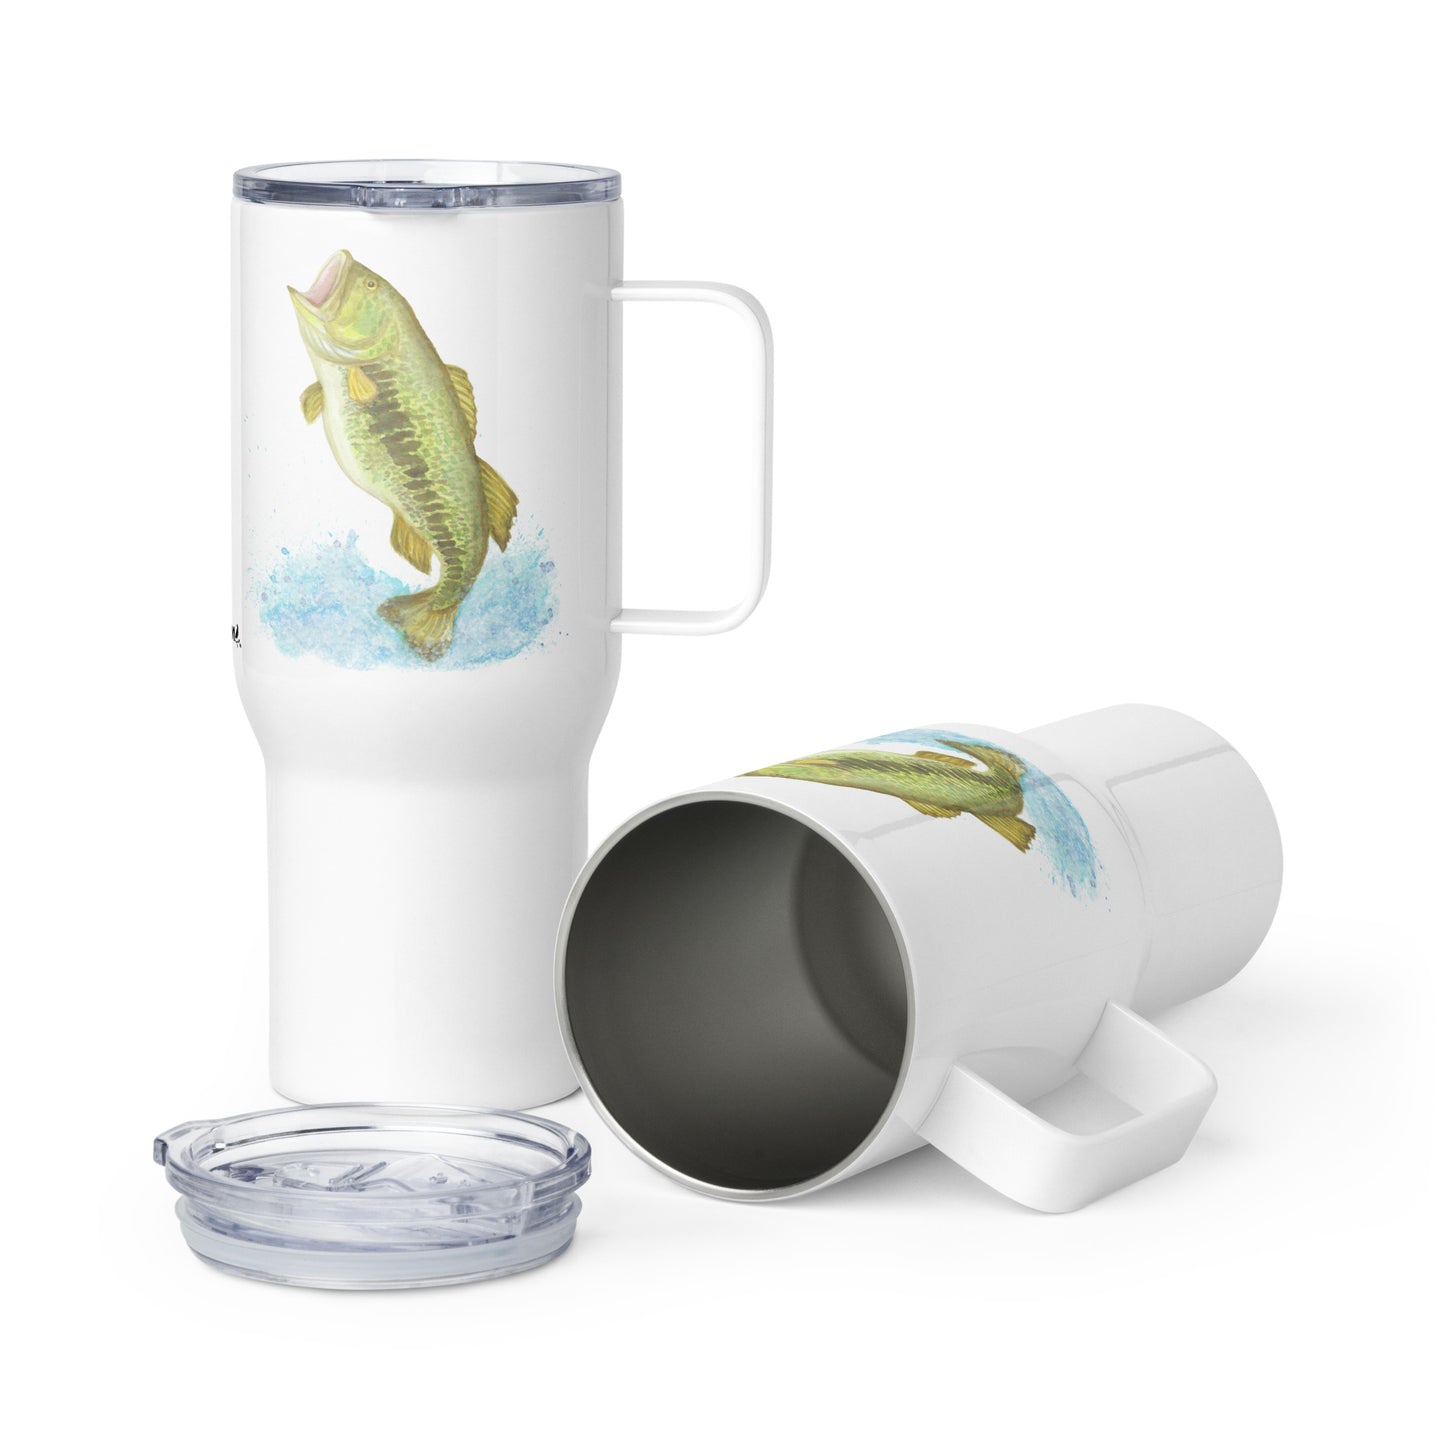 Stainless steel travel mug with handle. Holds 25 ounces of hot or cold drinks. Has print of watercolor bass fish on both sides. Fits most car cup holders. Comes with spill-proof BPA-free plastic lid.